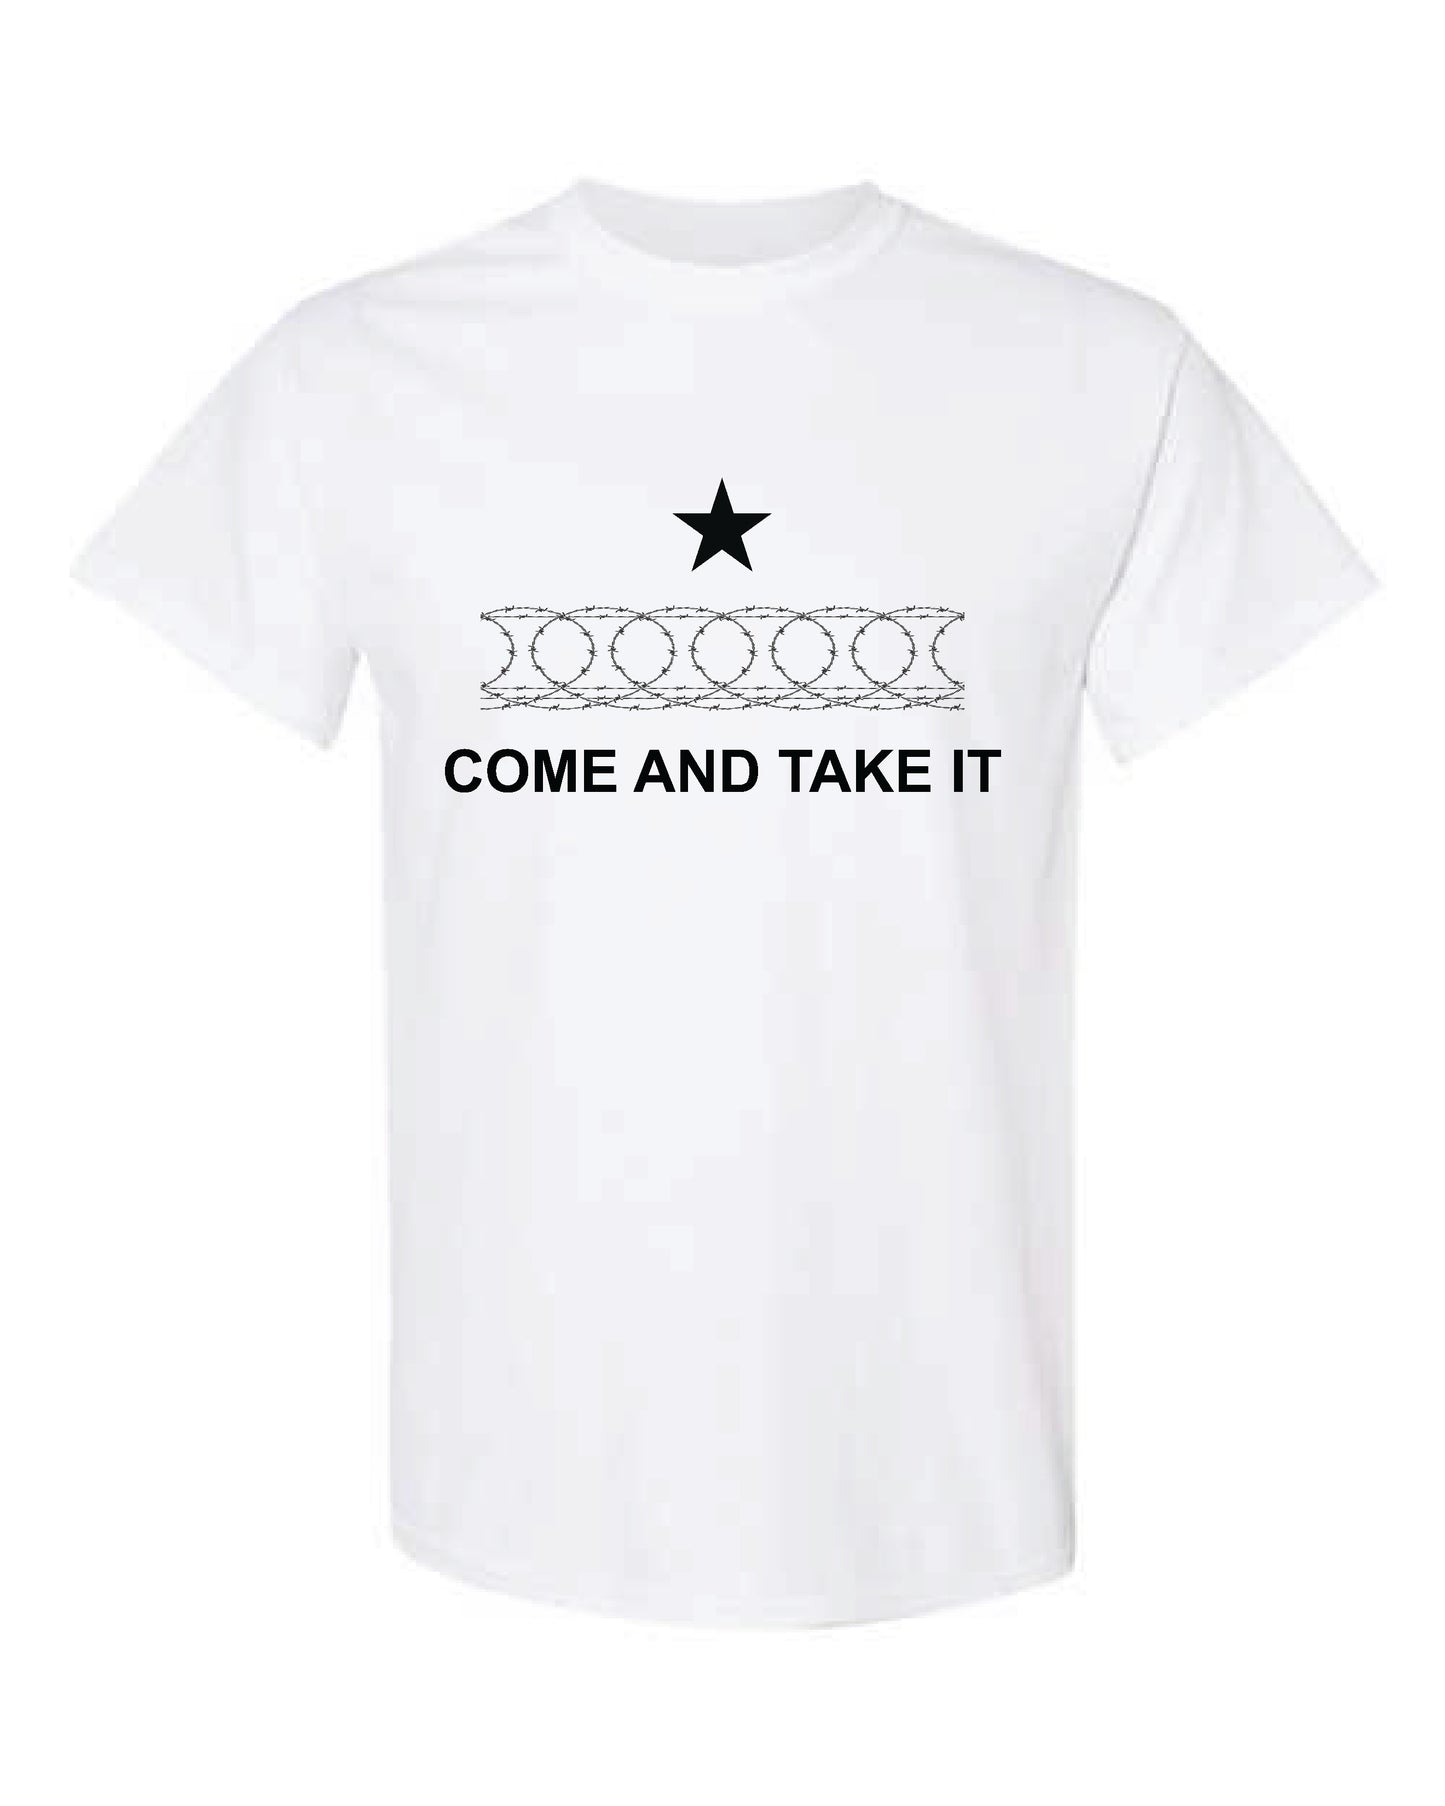 Come And Take It T-shirt, White, Medium